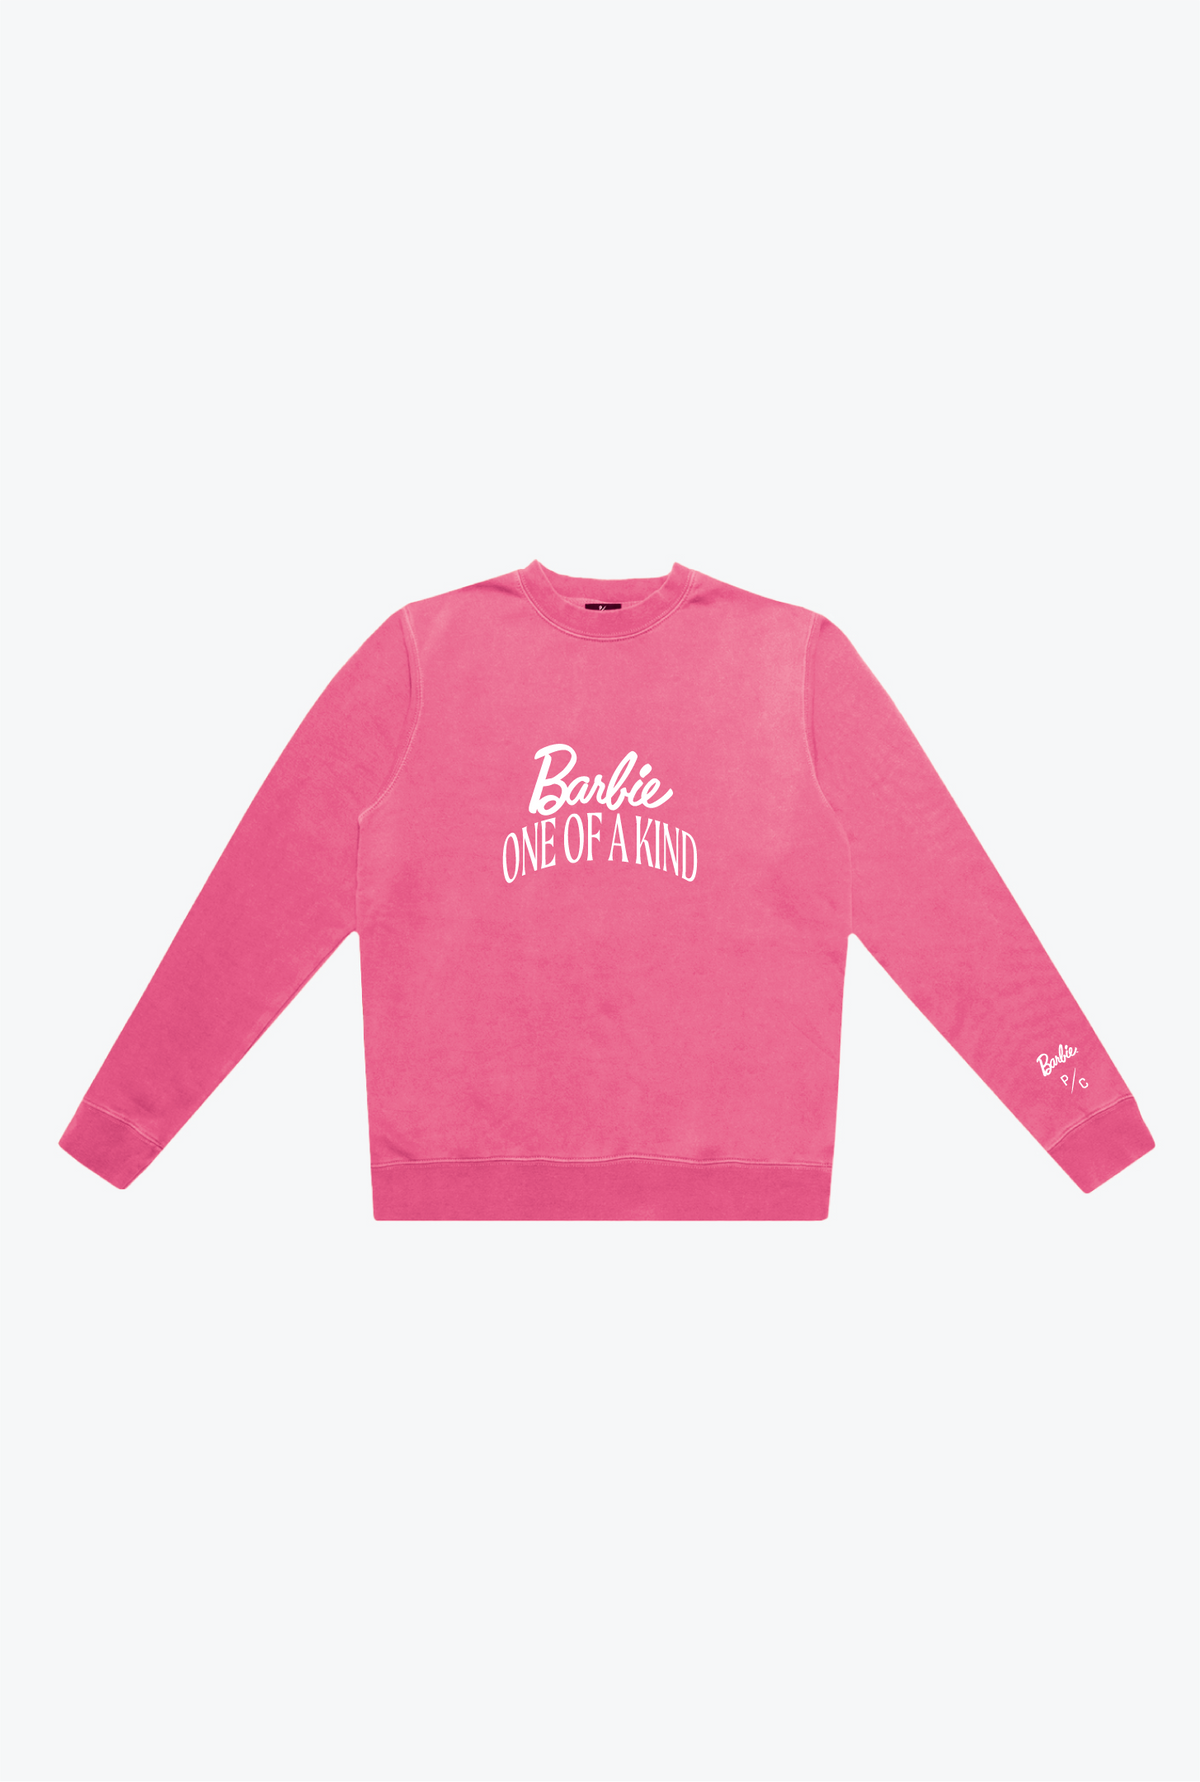 Barbie One Of A Kind Pigment Dye Crewneck - Pink